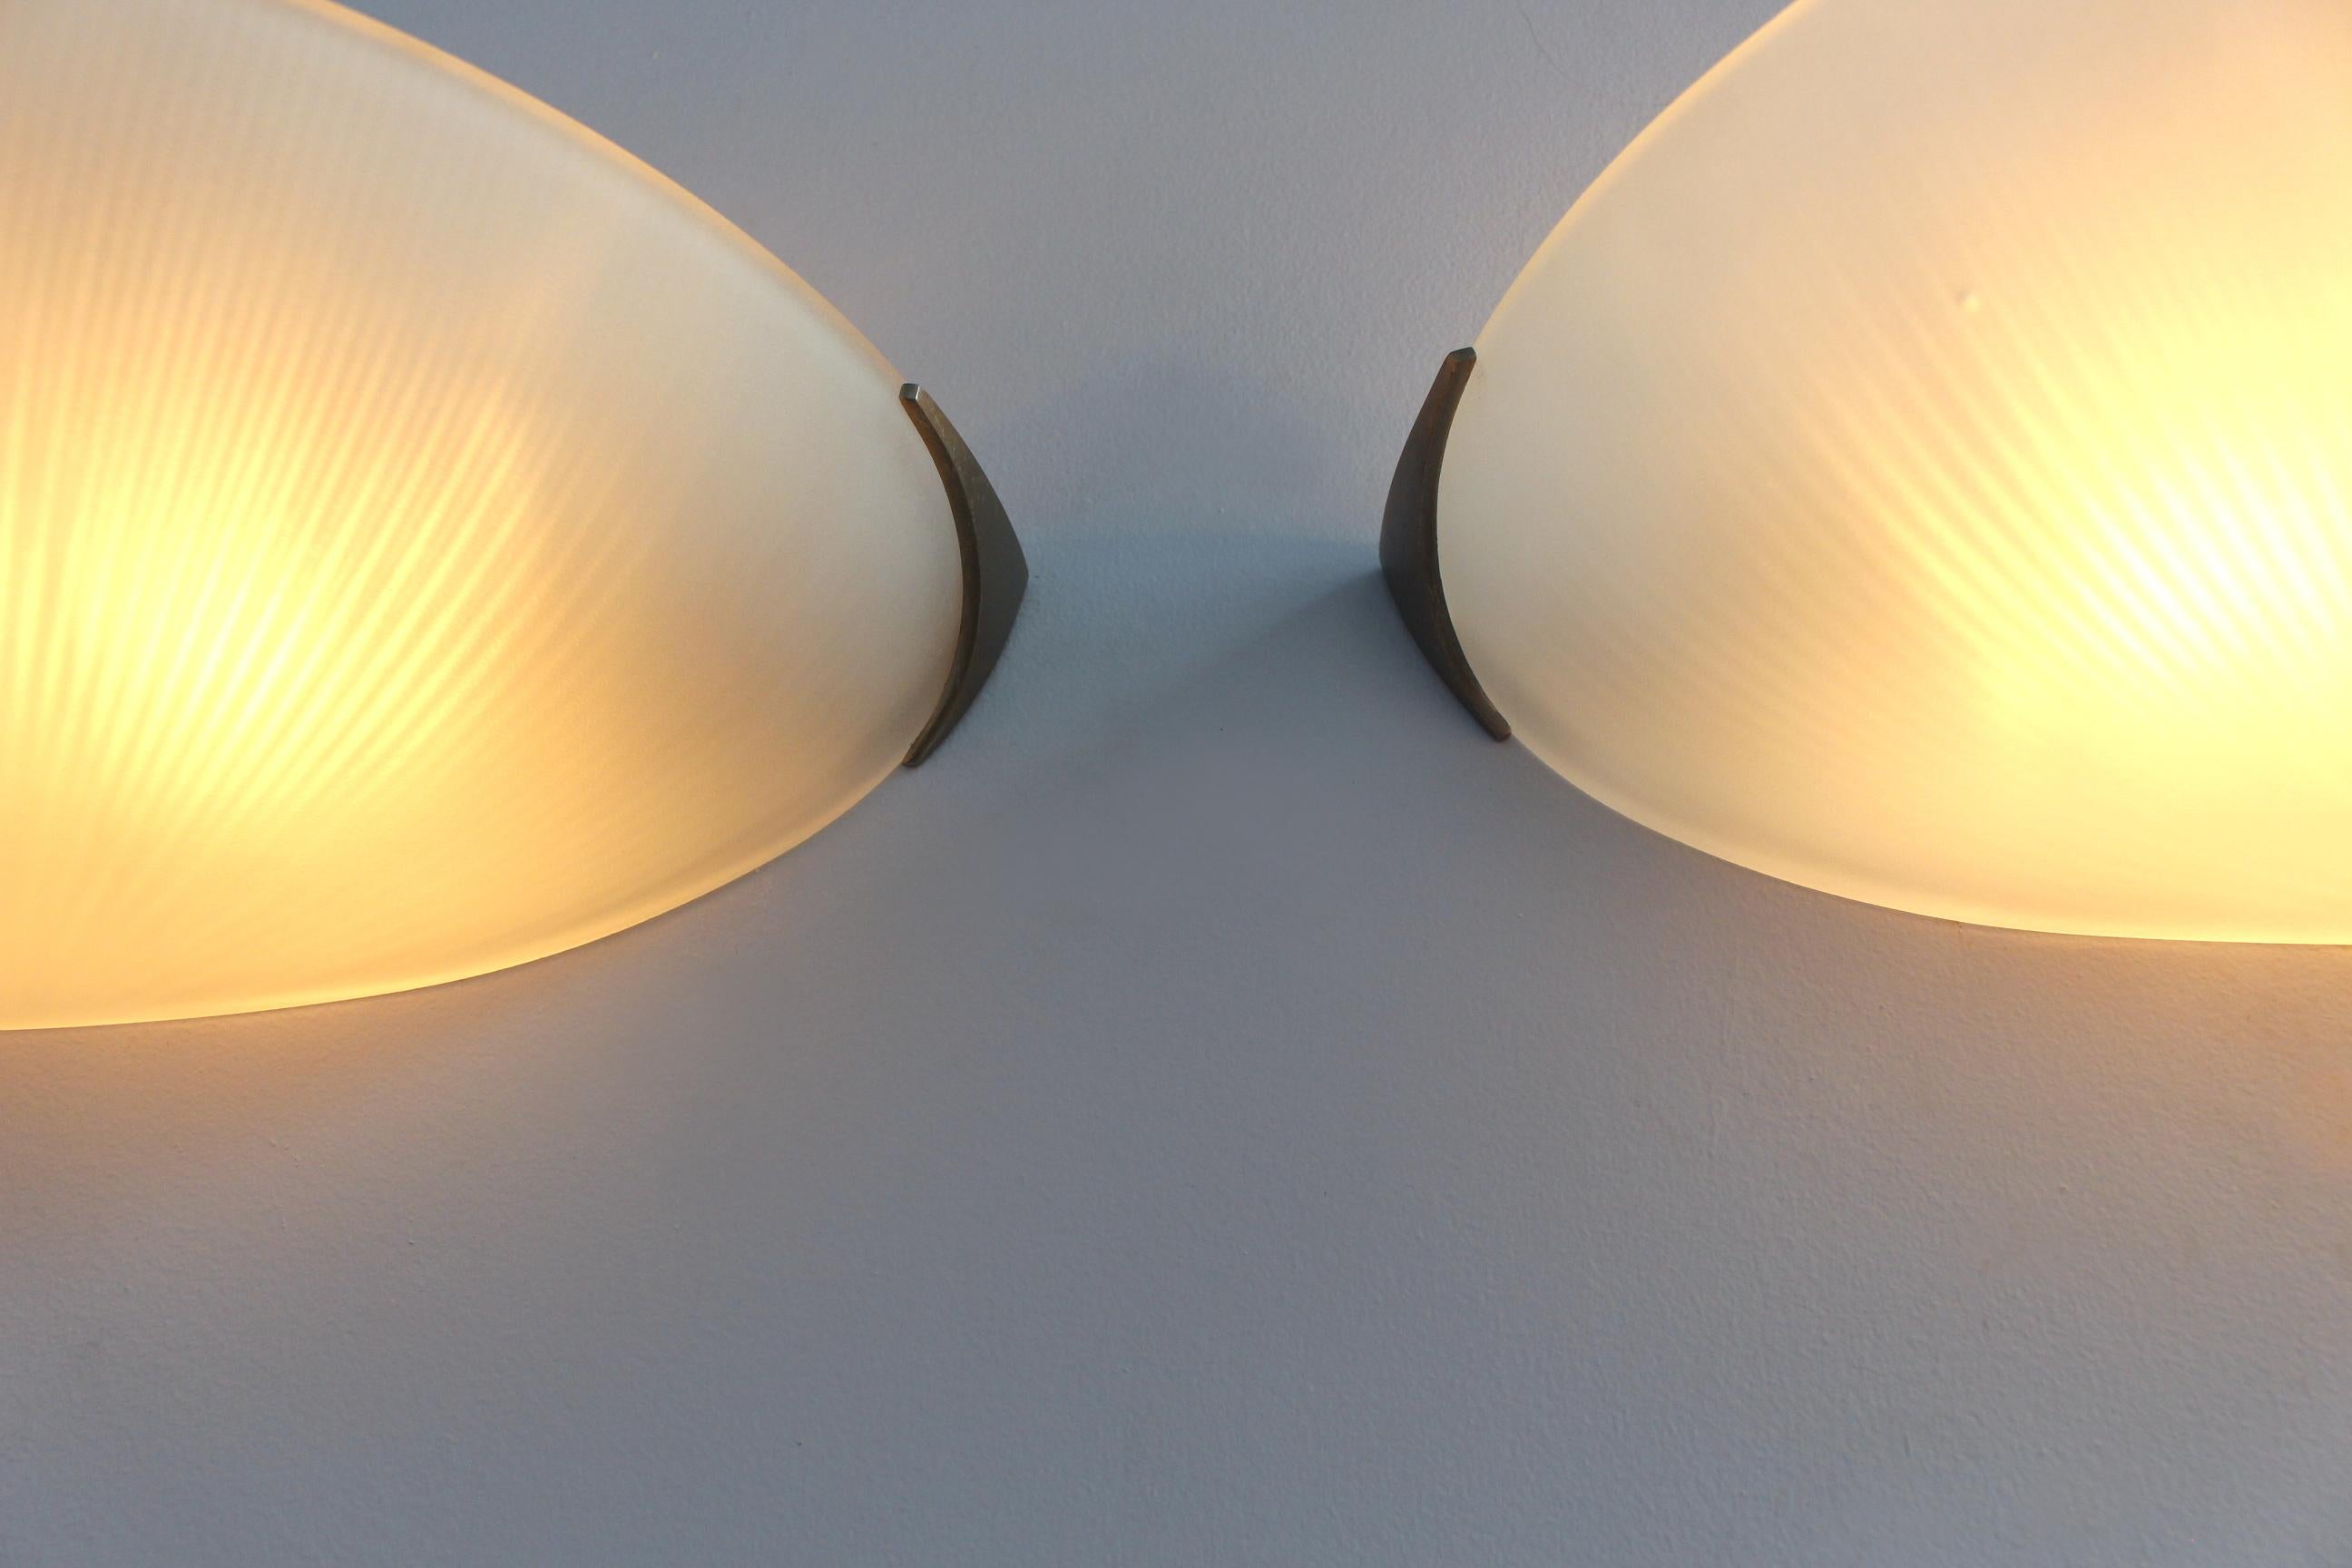 Pair of Fine French Art Deco Fluted Glass and Nickel Wall Lights by Perzel For Sale 4